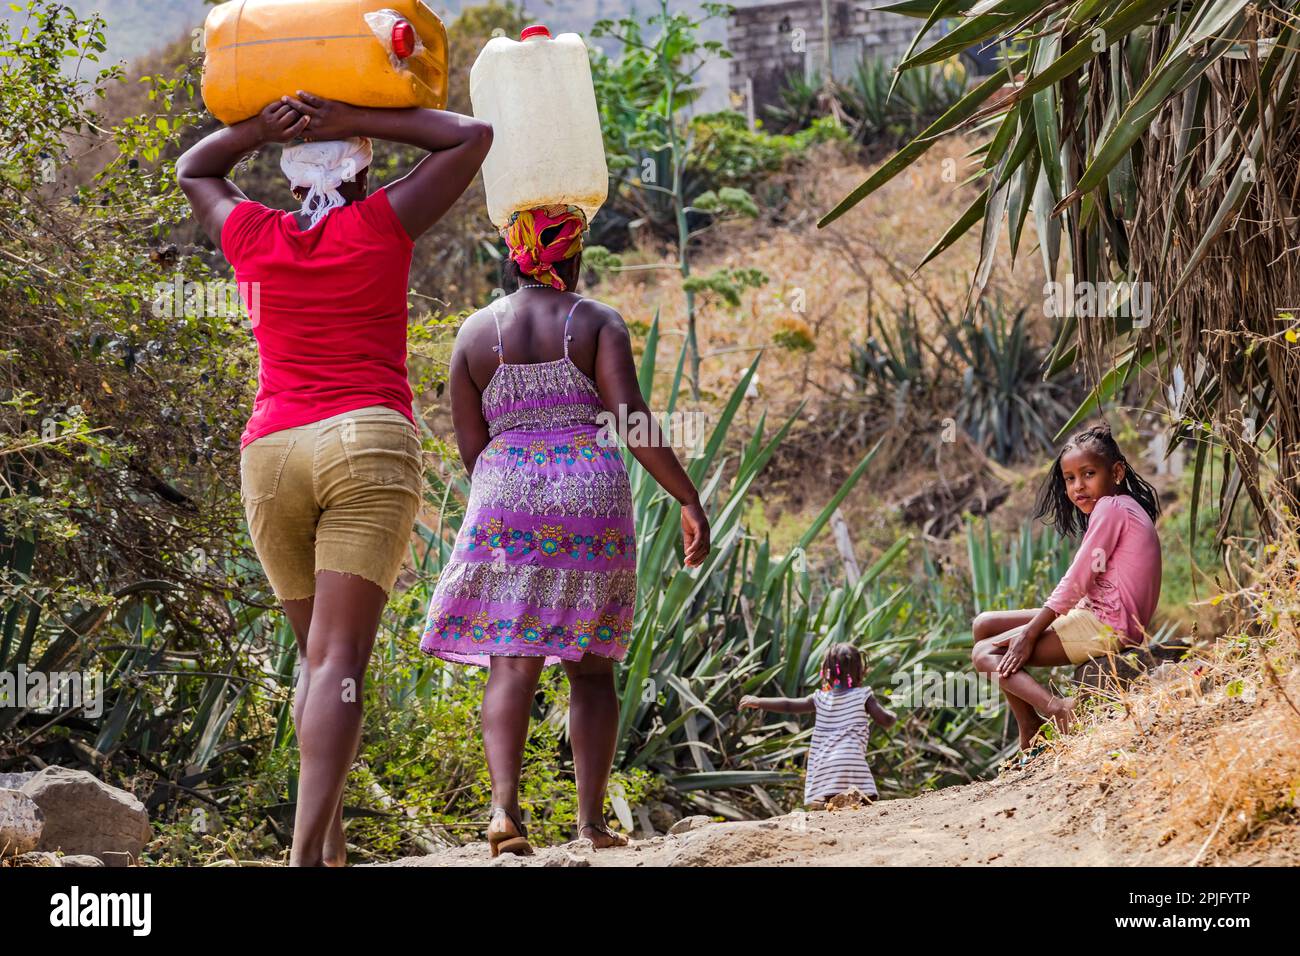 Two women and a child carrying water canisters as heavy load on their heads, Santiago Island, Cape Verde Islands Stock Photo